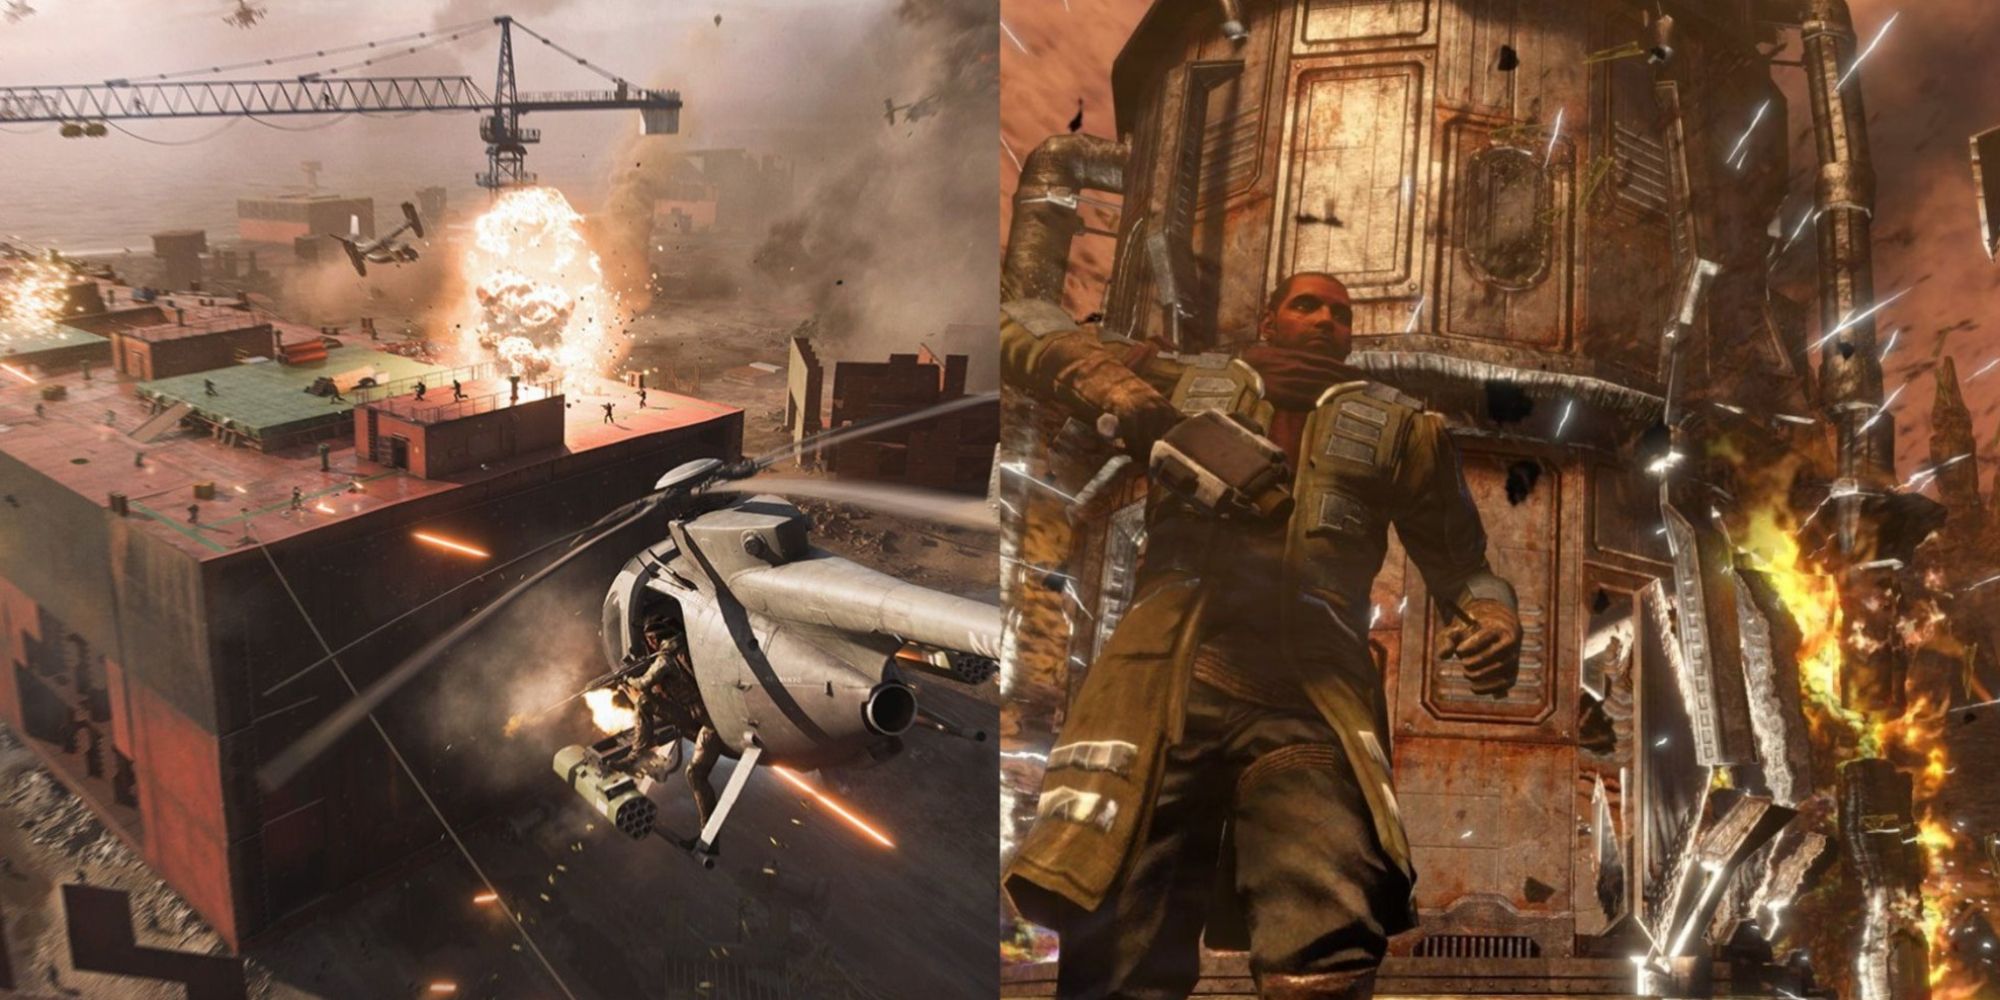 Games That Let You Destroy Buildings Featured Split Image Battlefield and Red Faction